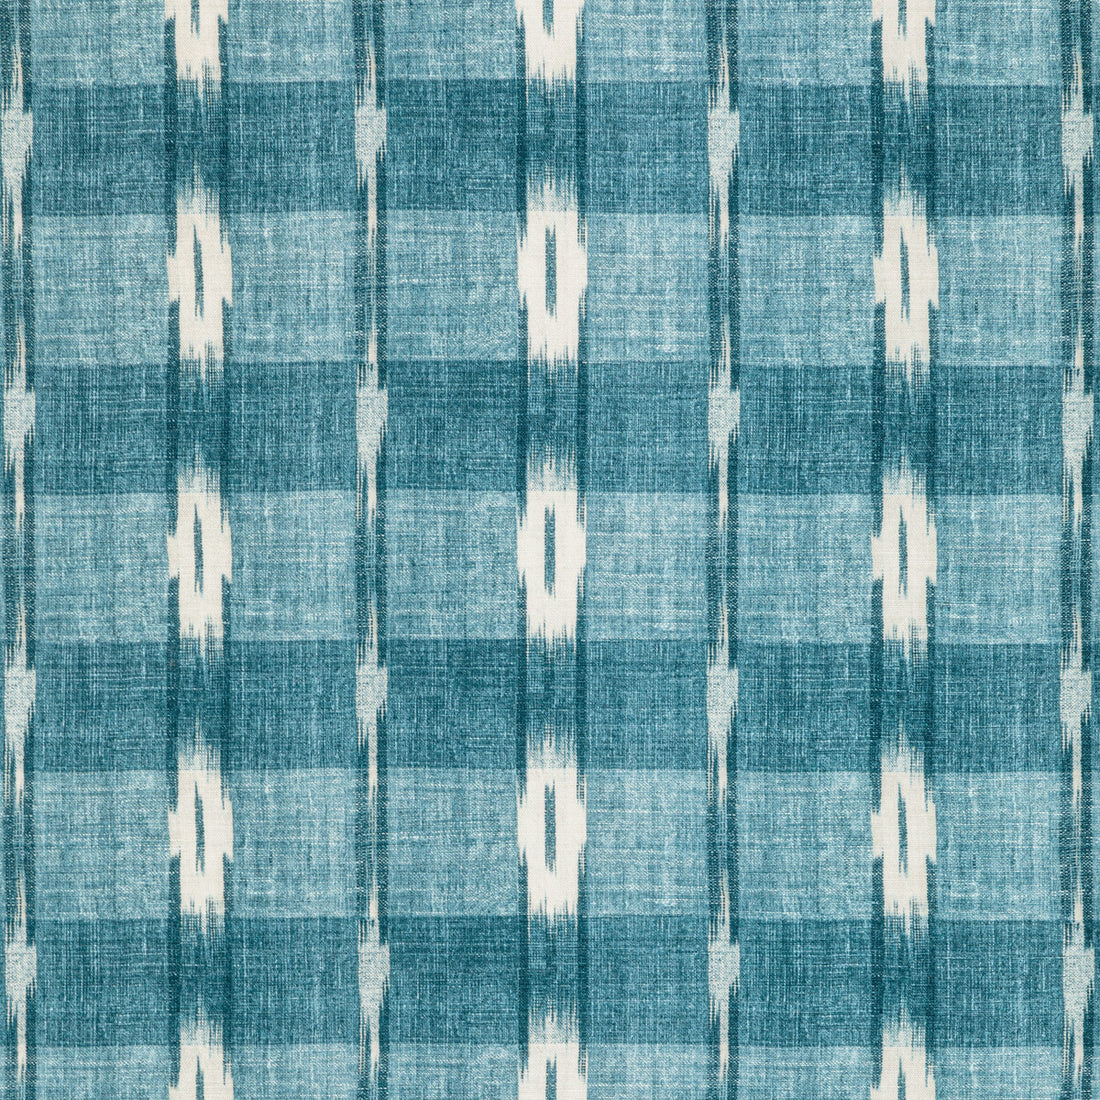 Girard Print fabric in teal color - pattern 8022106.13.0 - by Brunschwig &amp; Fils in the Manoir collection